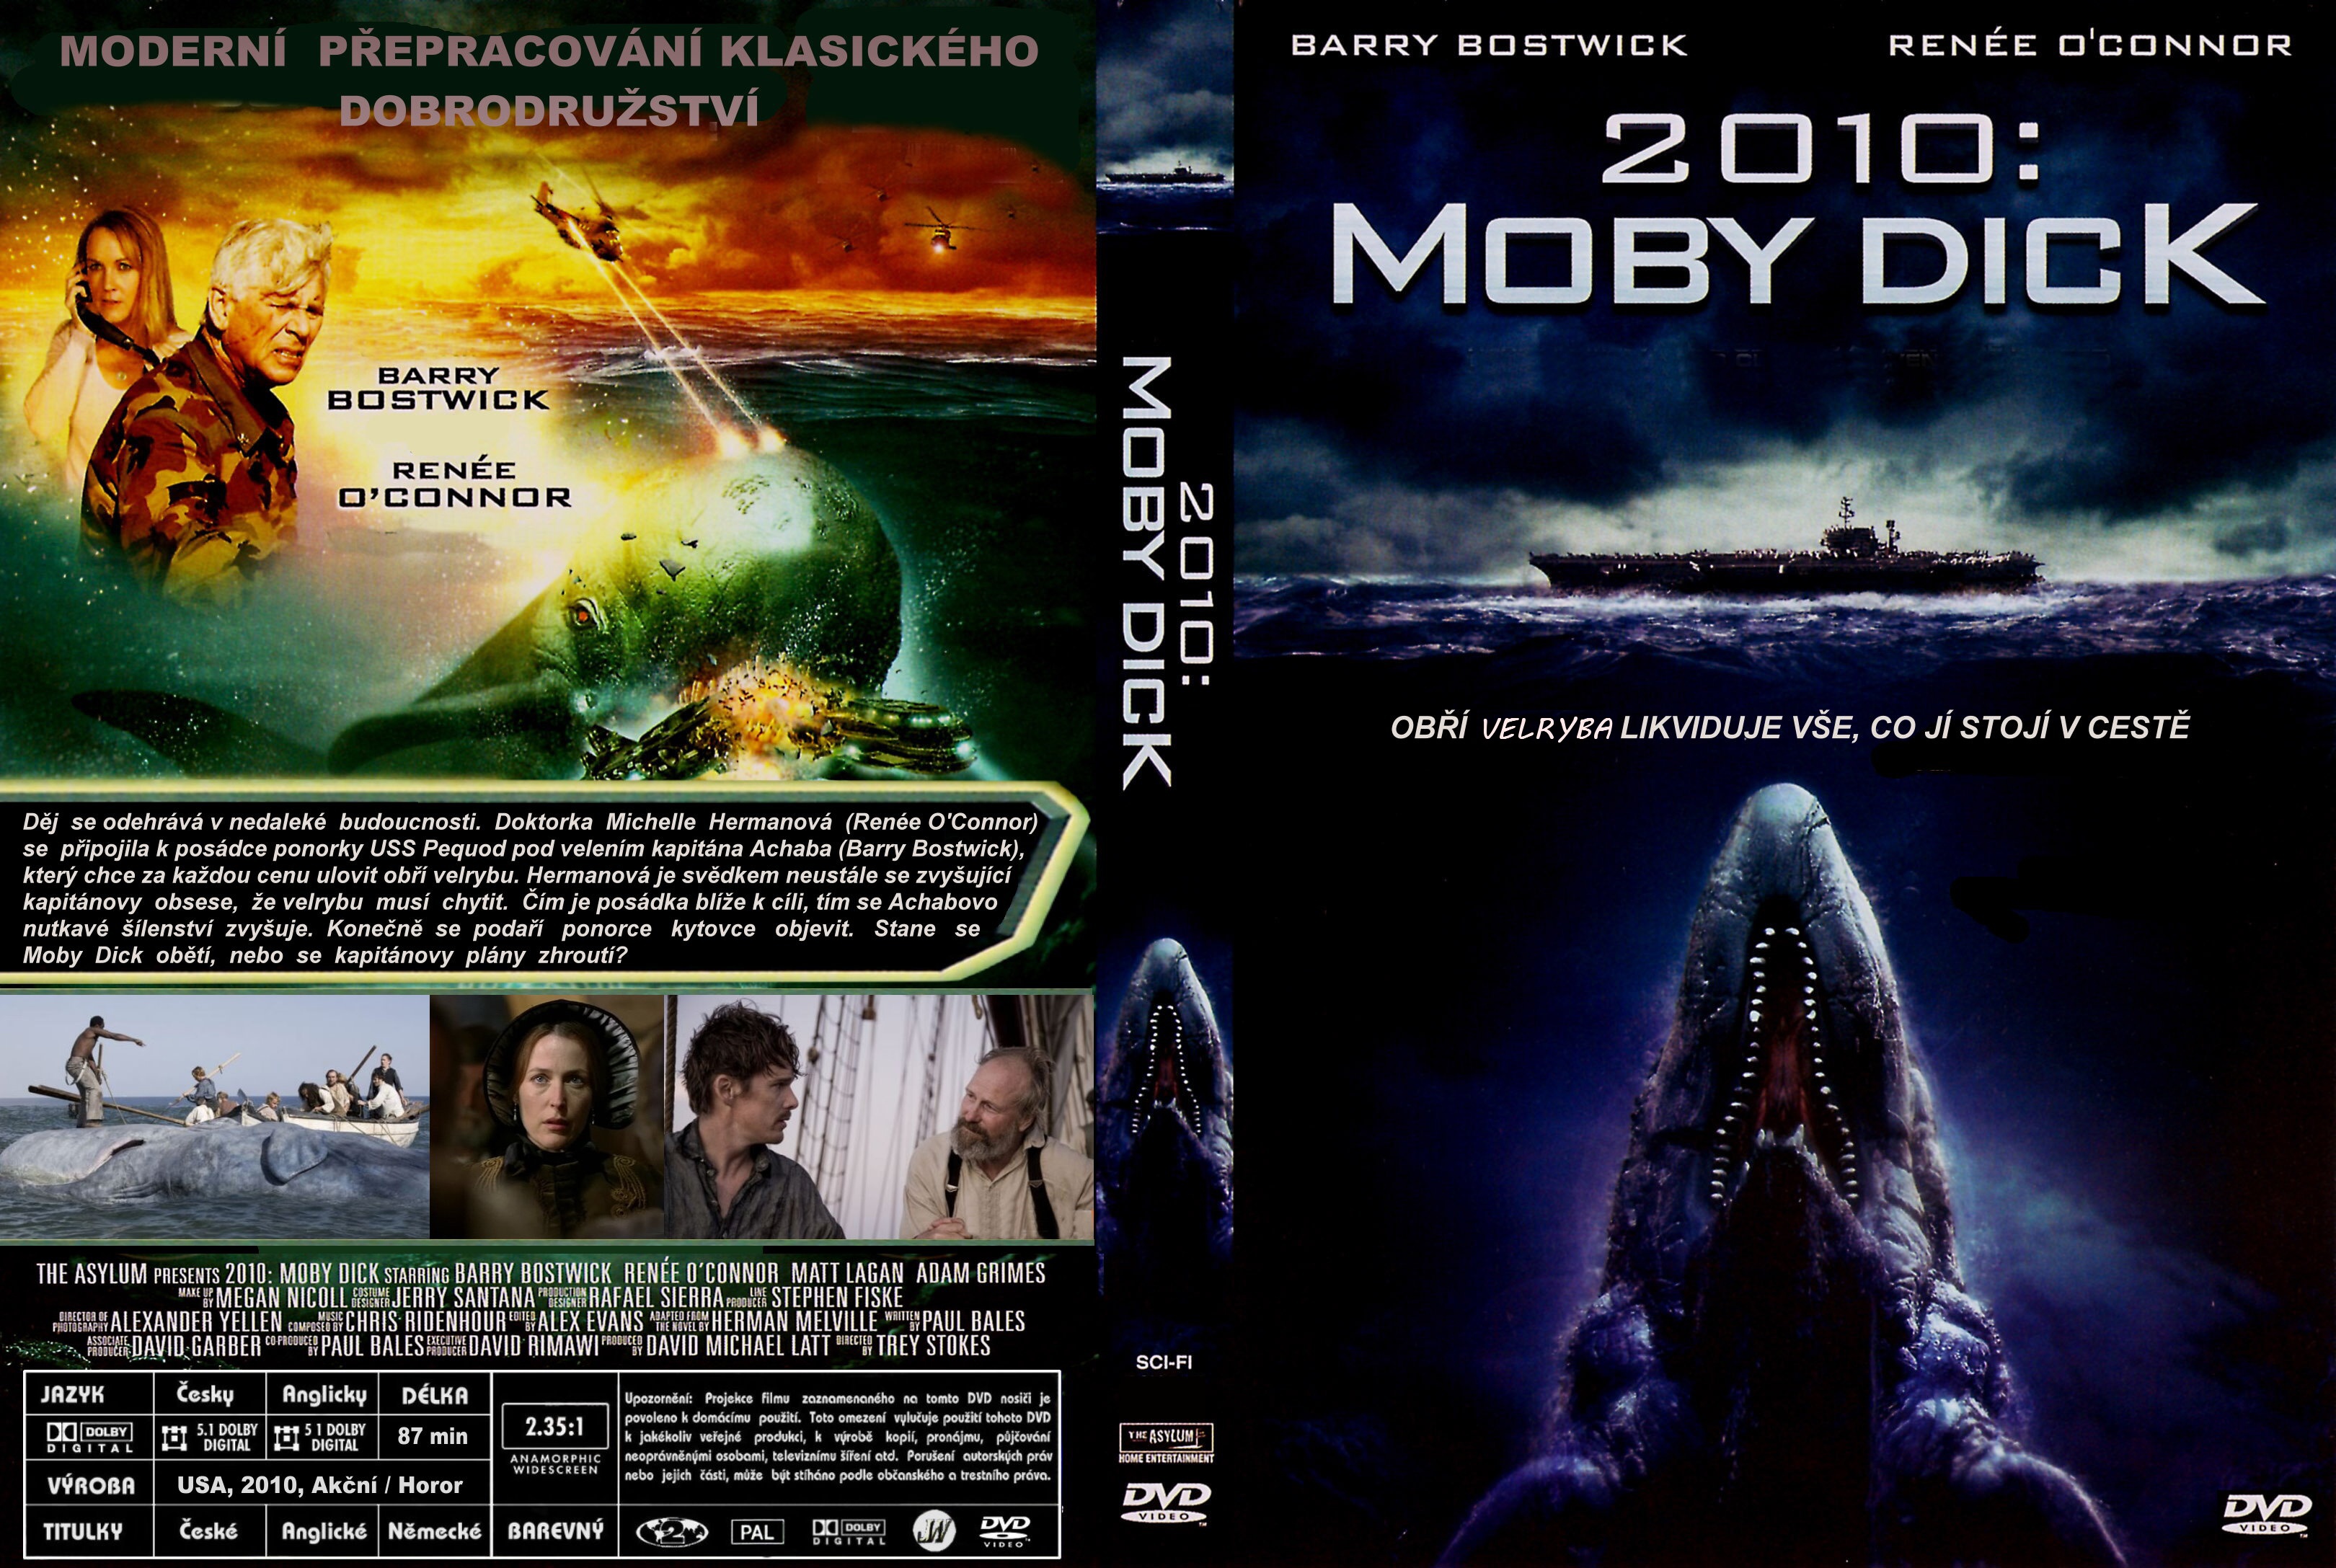 Publication date of moby dick